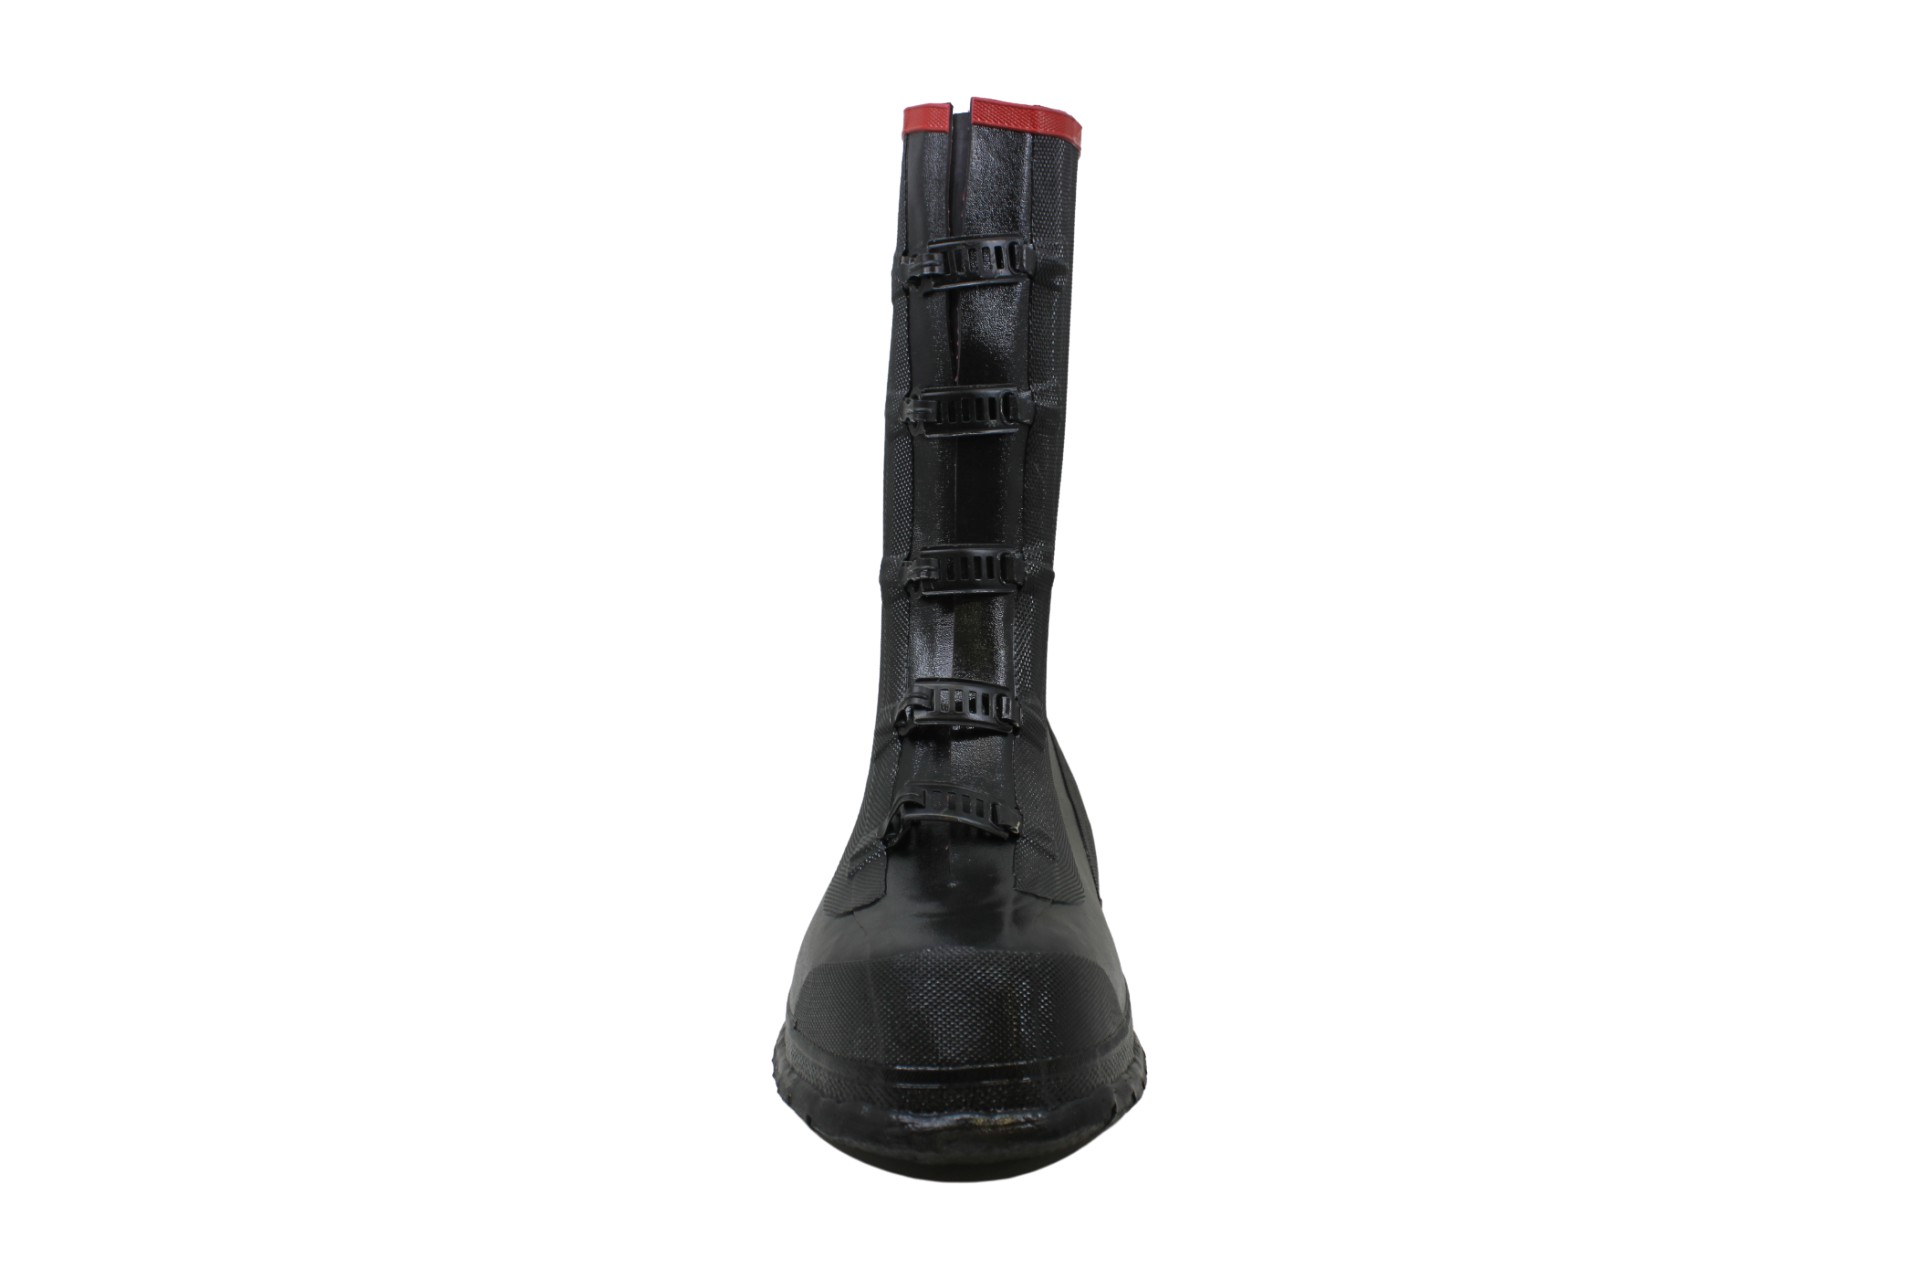 Ranger 15 in Rubber Overshoe Boot Size 11(M) - image 3 of 5